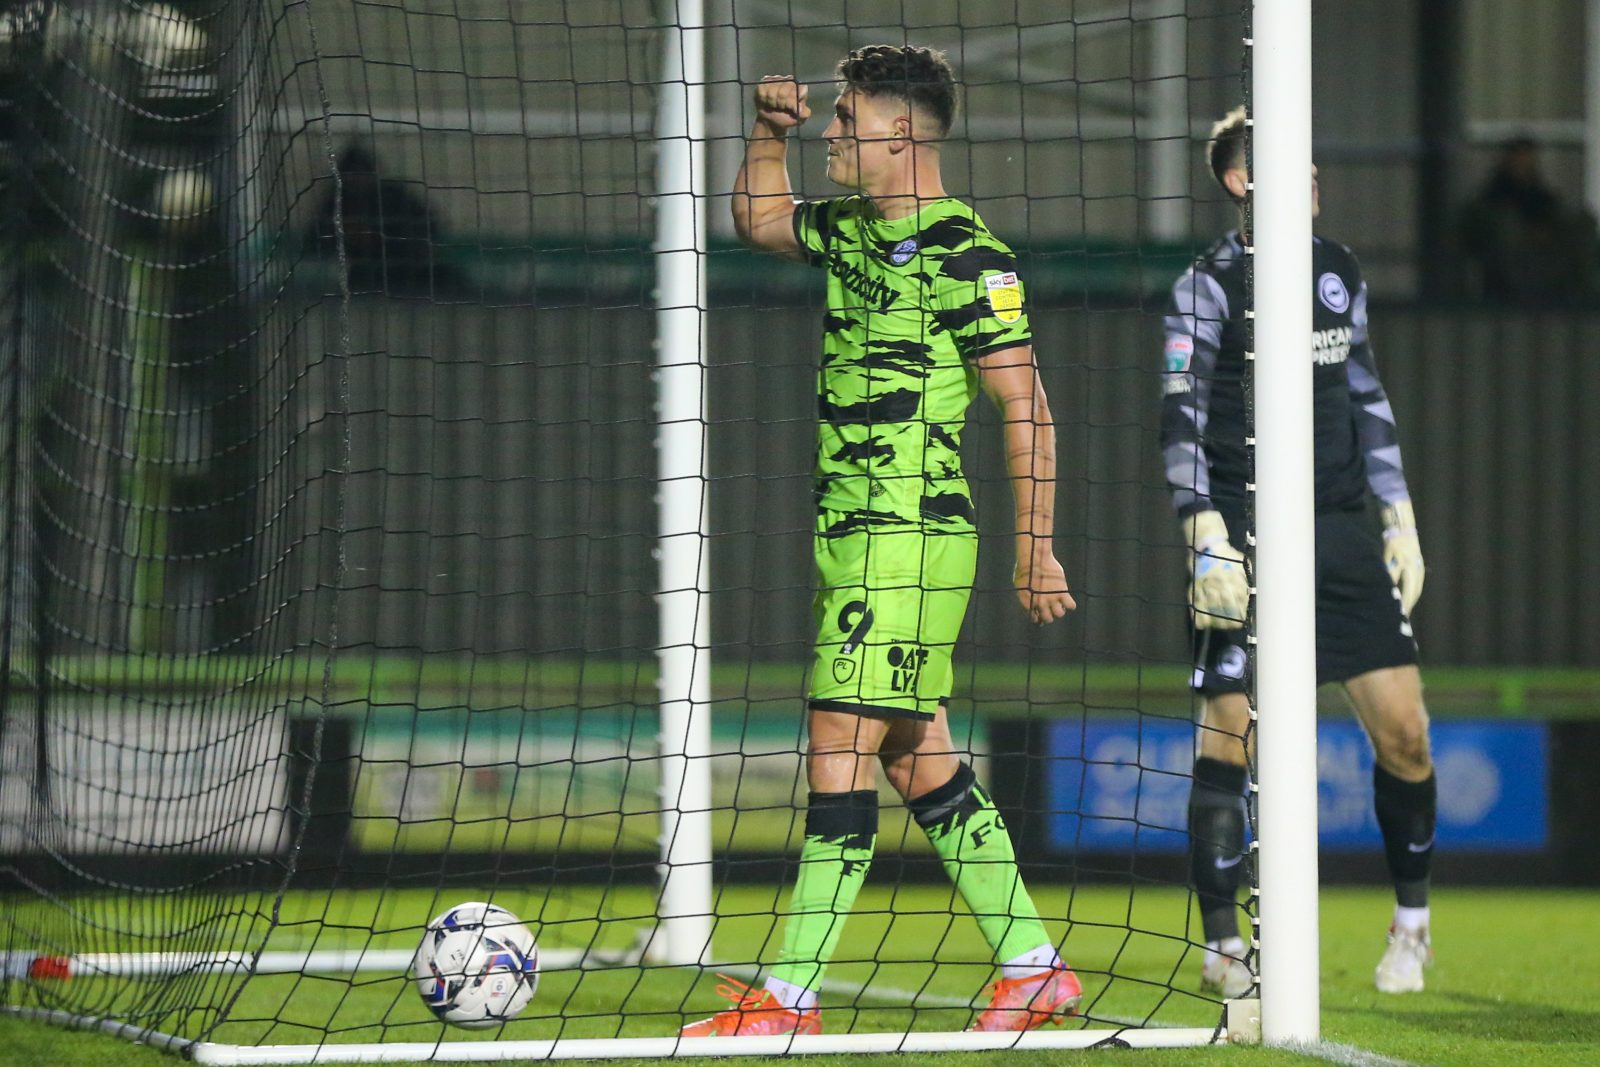 PSI SH Forest Green Rovers Brighton Hove Albion 12Oct 1485 1 | In pictures: Forest Green gain bonus point in penalty shootout win over Brighton U21s